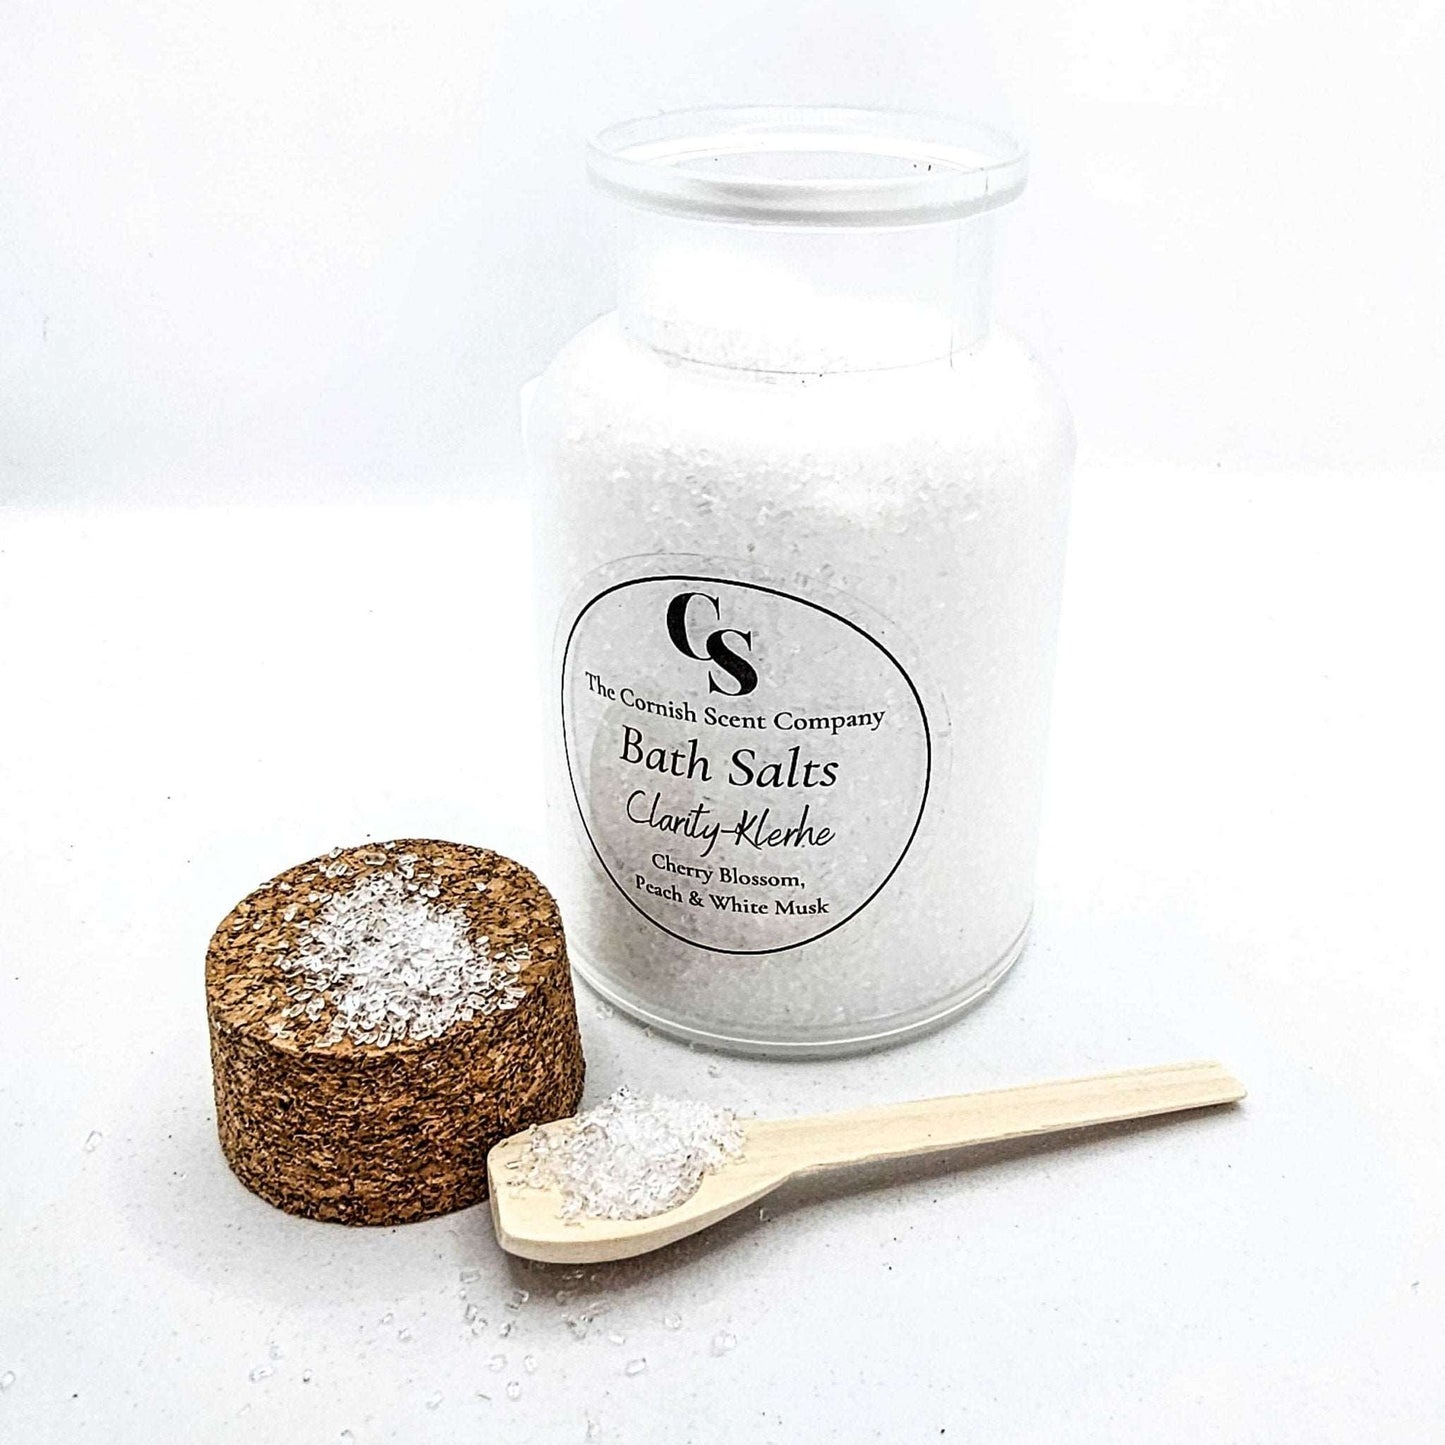 Soothing bath salts clarity - The Cornish Scent Company